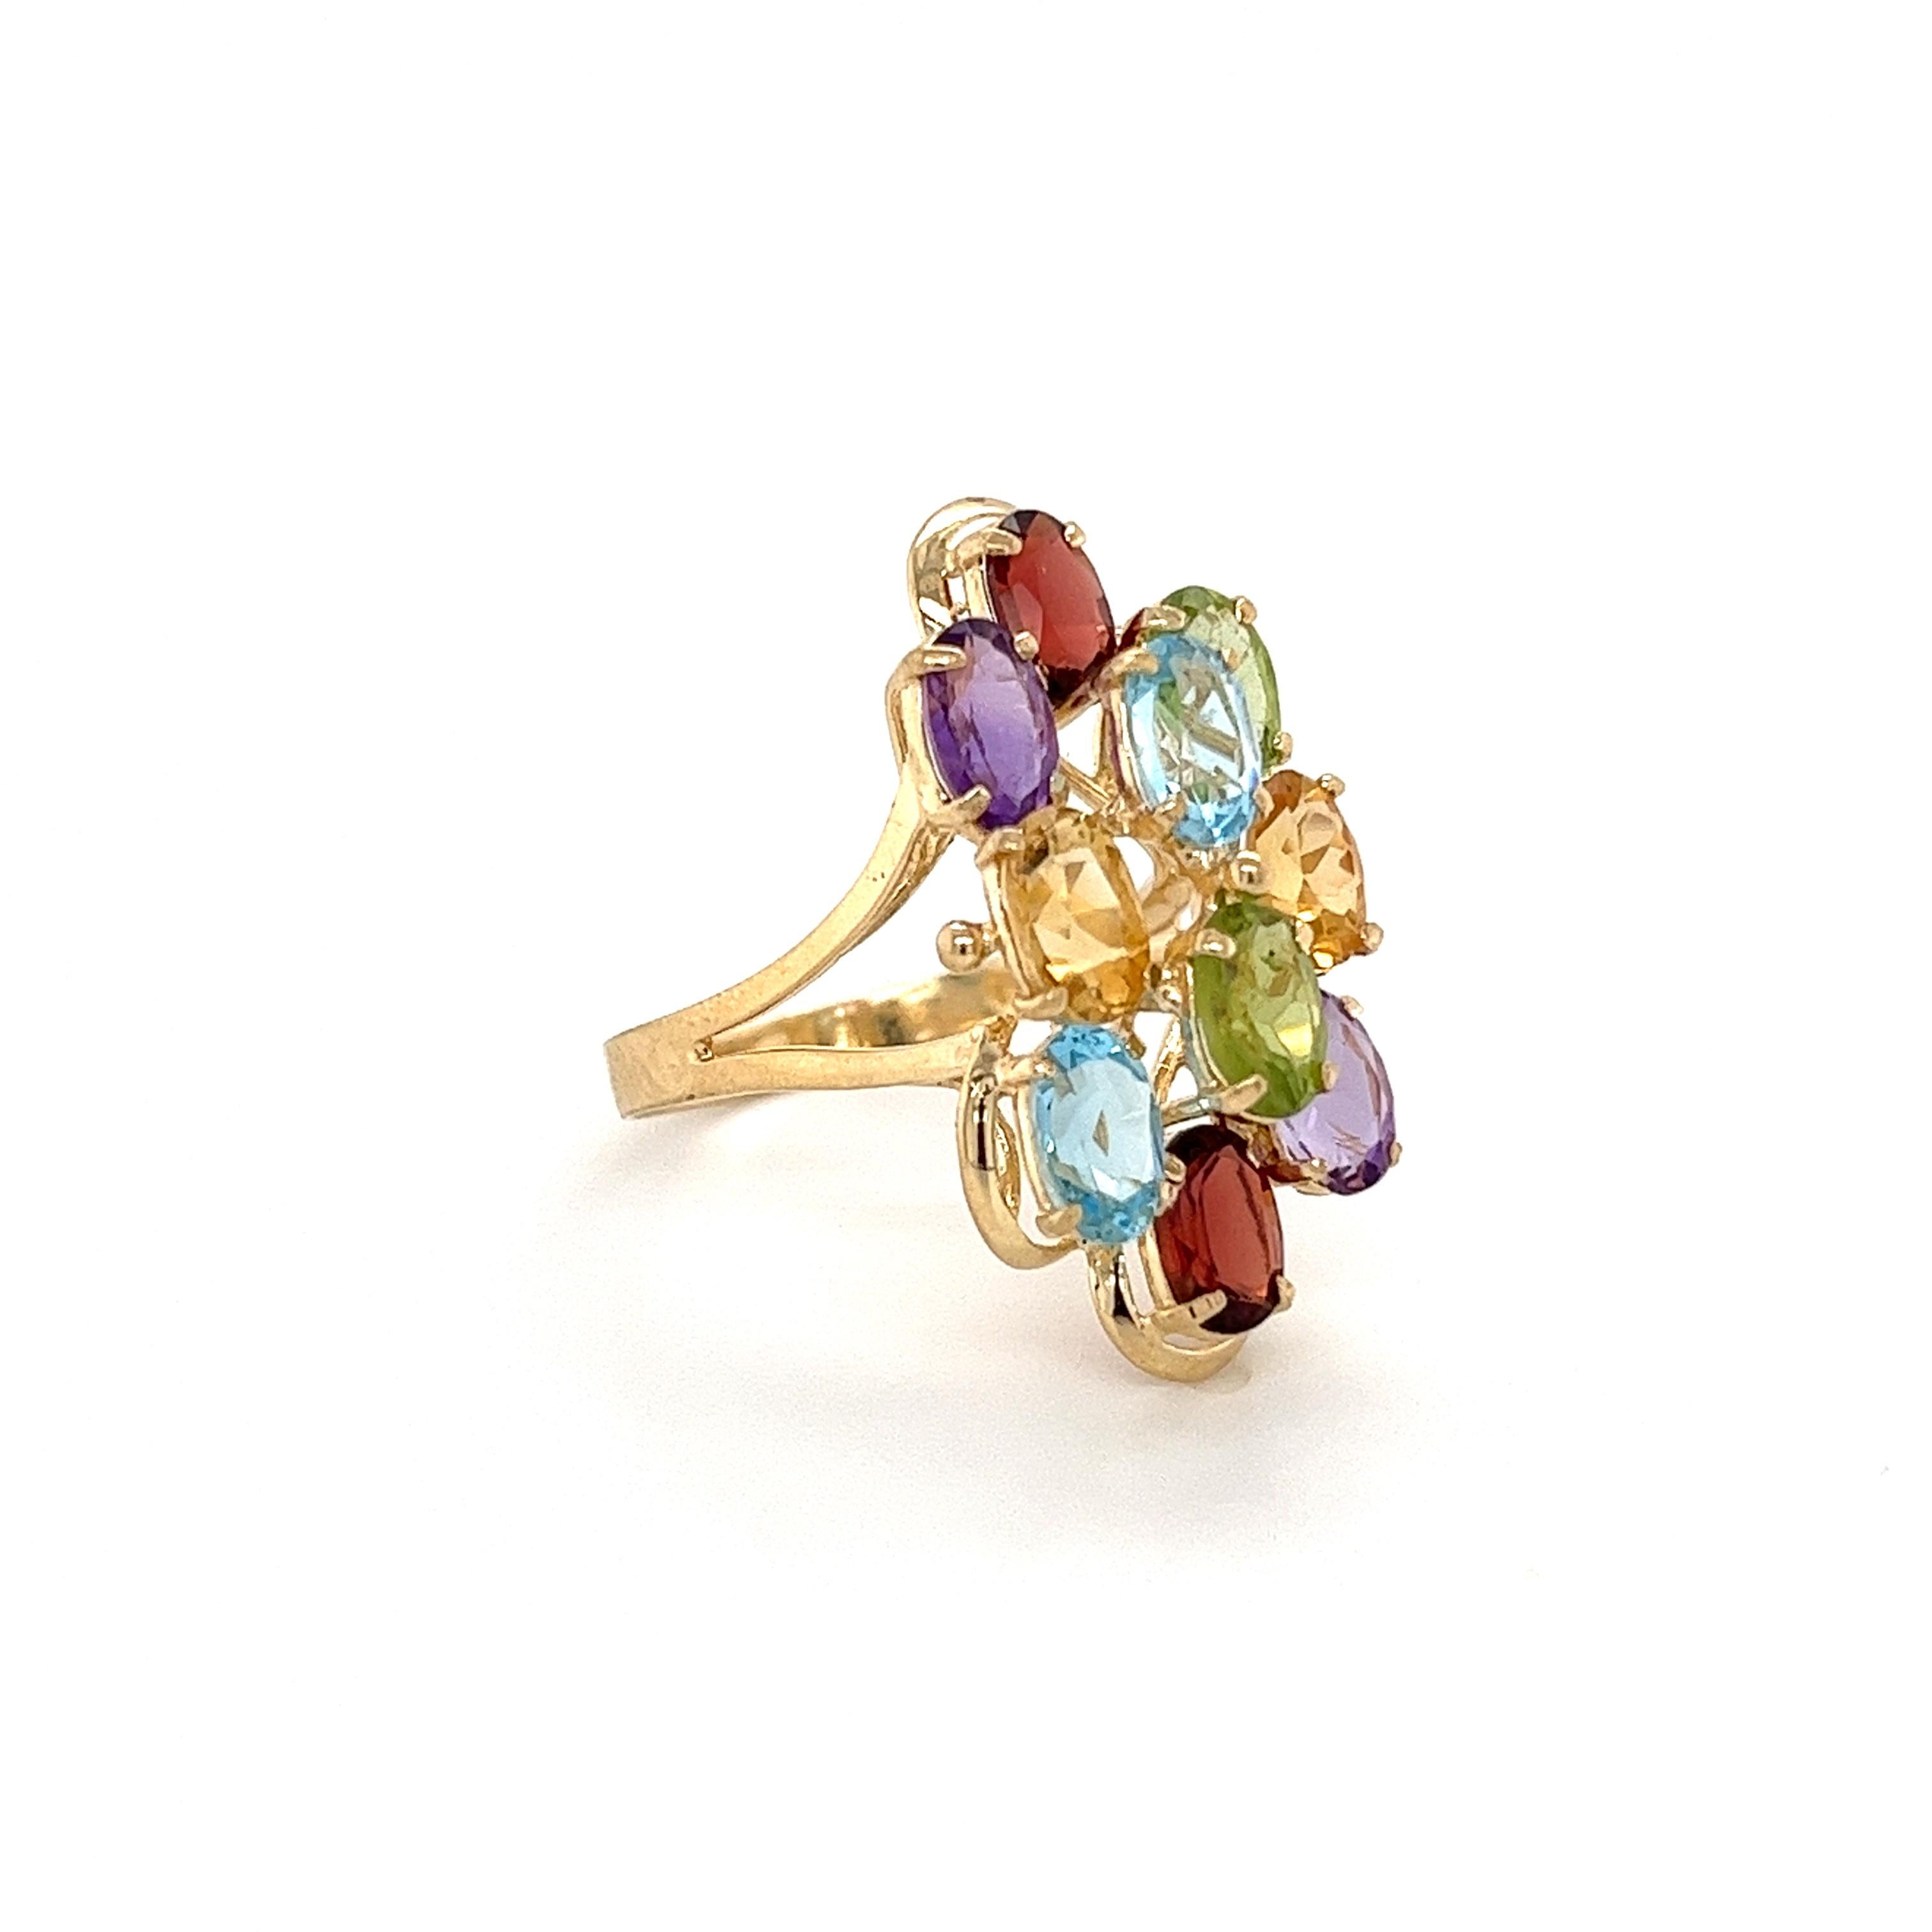 14K solid gold colorful gemstone cluster ring. This stunning ring hosts a pair of Topaz, Peridot, Garnet, Amethyst, and Citrine gemstones. Each pair of gemstones is parallel to each other and oval brilliant cut.

✔ Gold Karat: 14K
✔ Topaz: Blue
✔